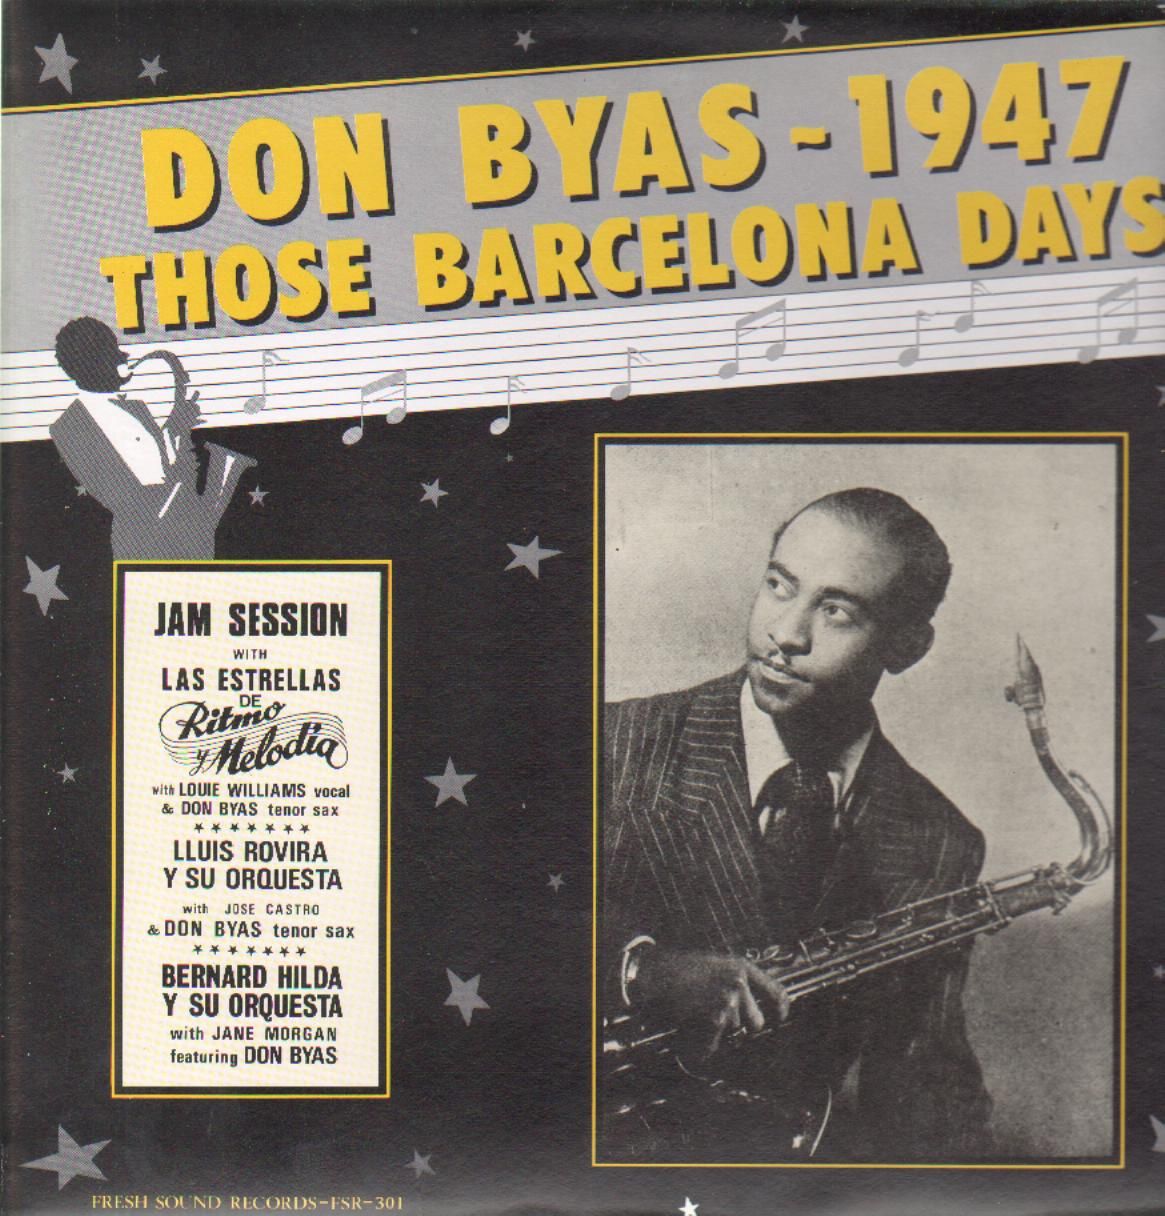 DON BYAS - Those Barcelona Days cover 